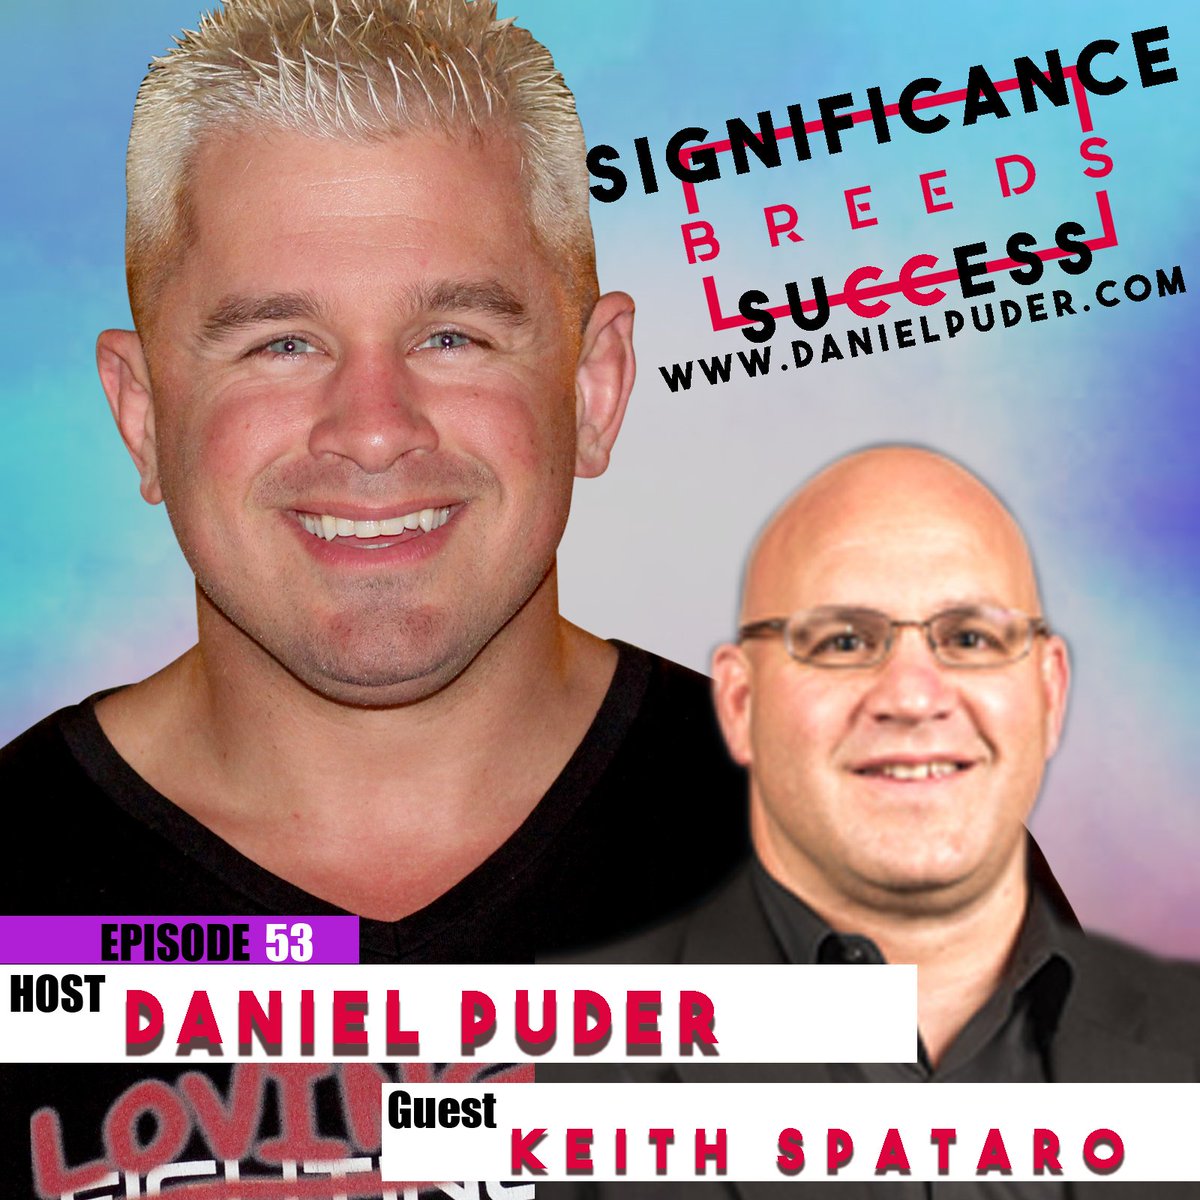 Daniel Puder | Keith Spataro | Developing Your Future | #podsessions #53 Direct spreaker.com/episode/183061… or itunes.apple.com/us/podcast/sig…